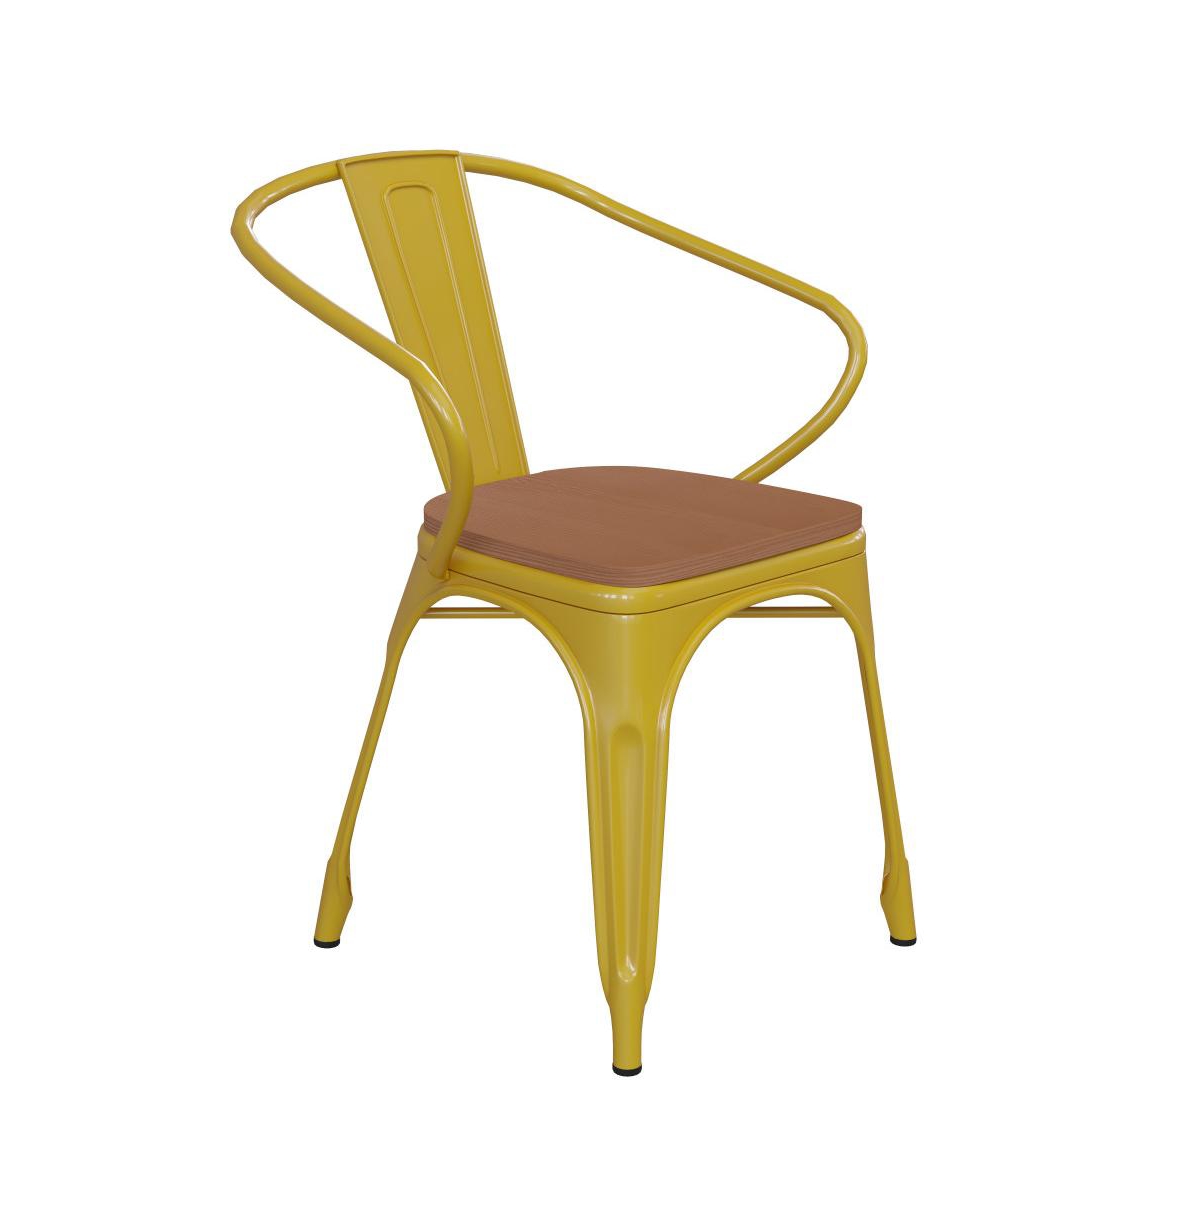 Emma+oliver Alva Metal Indoor-outdoor Stacking Chair With Vertical Slat Back, Arms And All-weather Polystyrene S In Yellow,teak